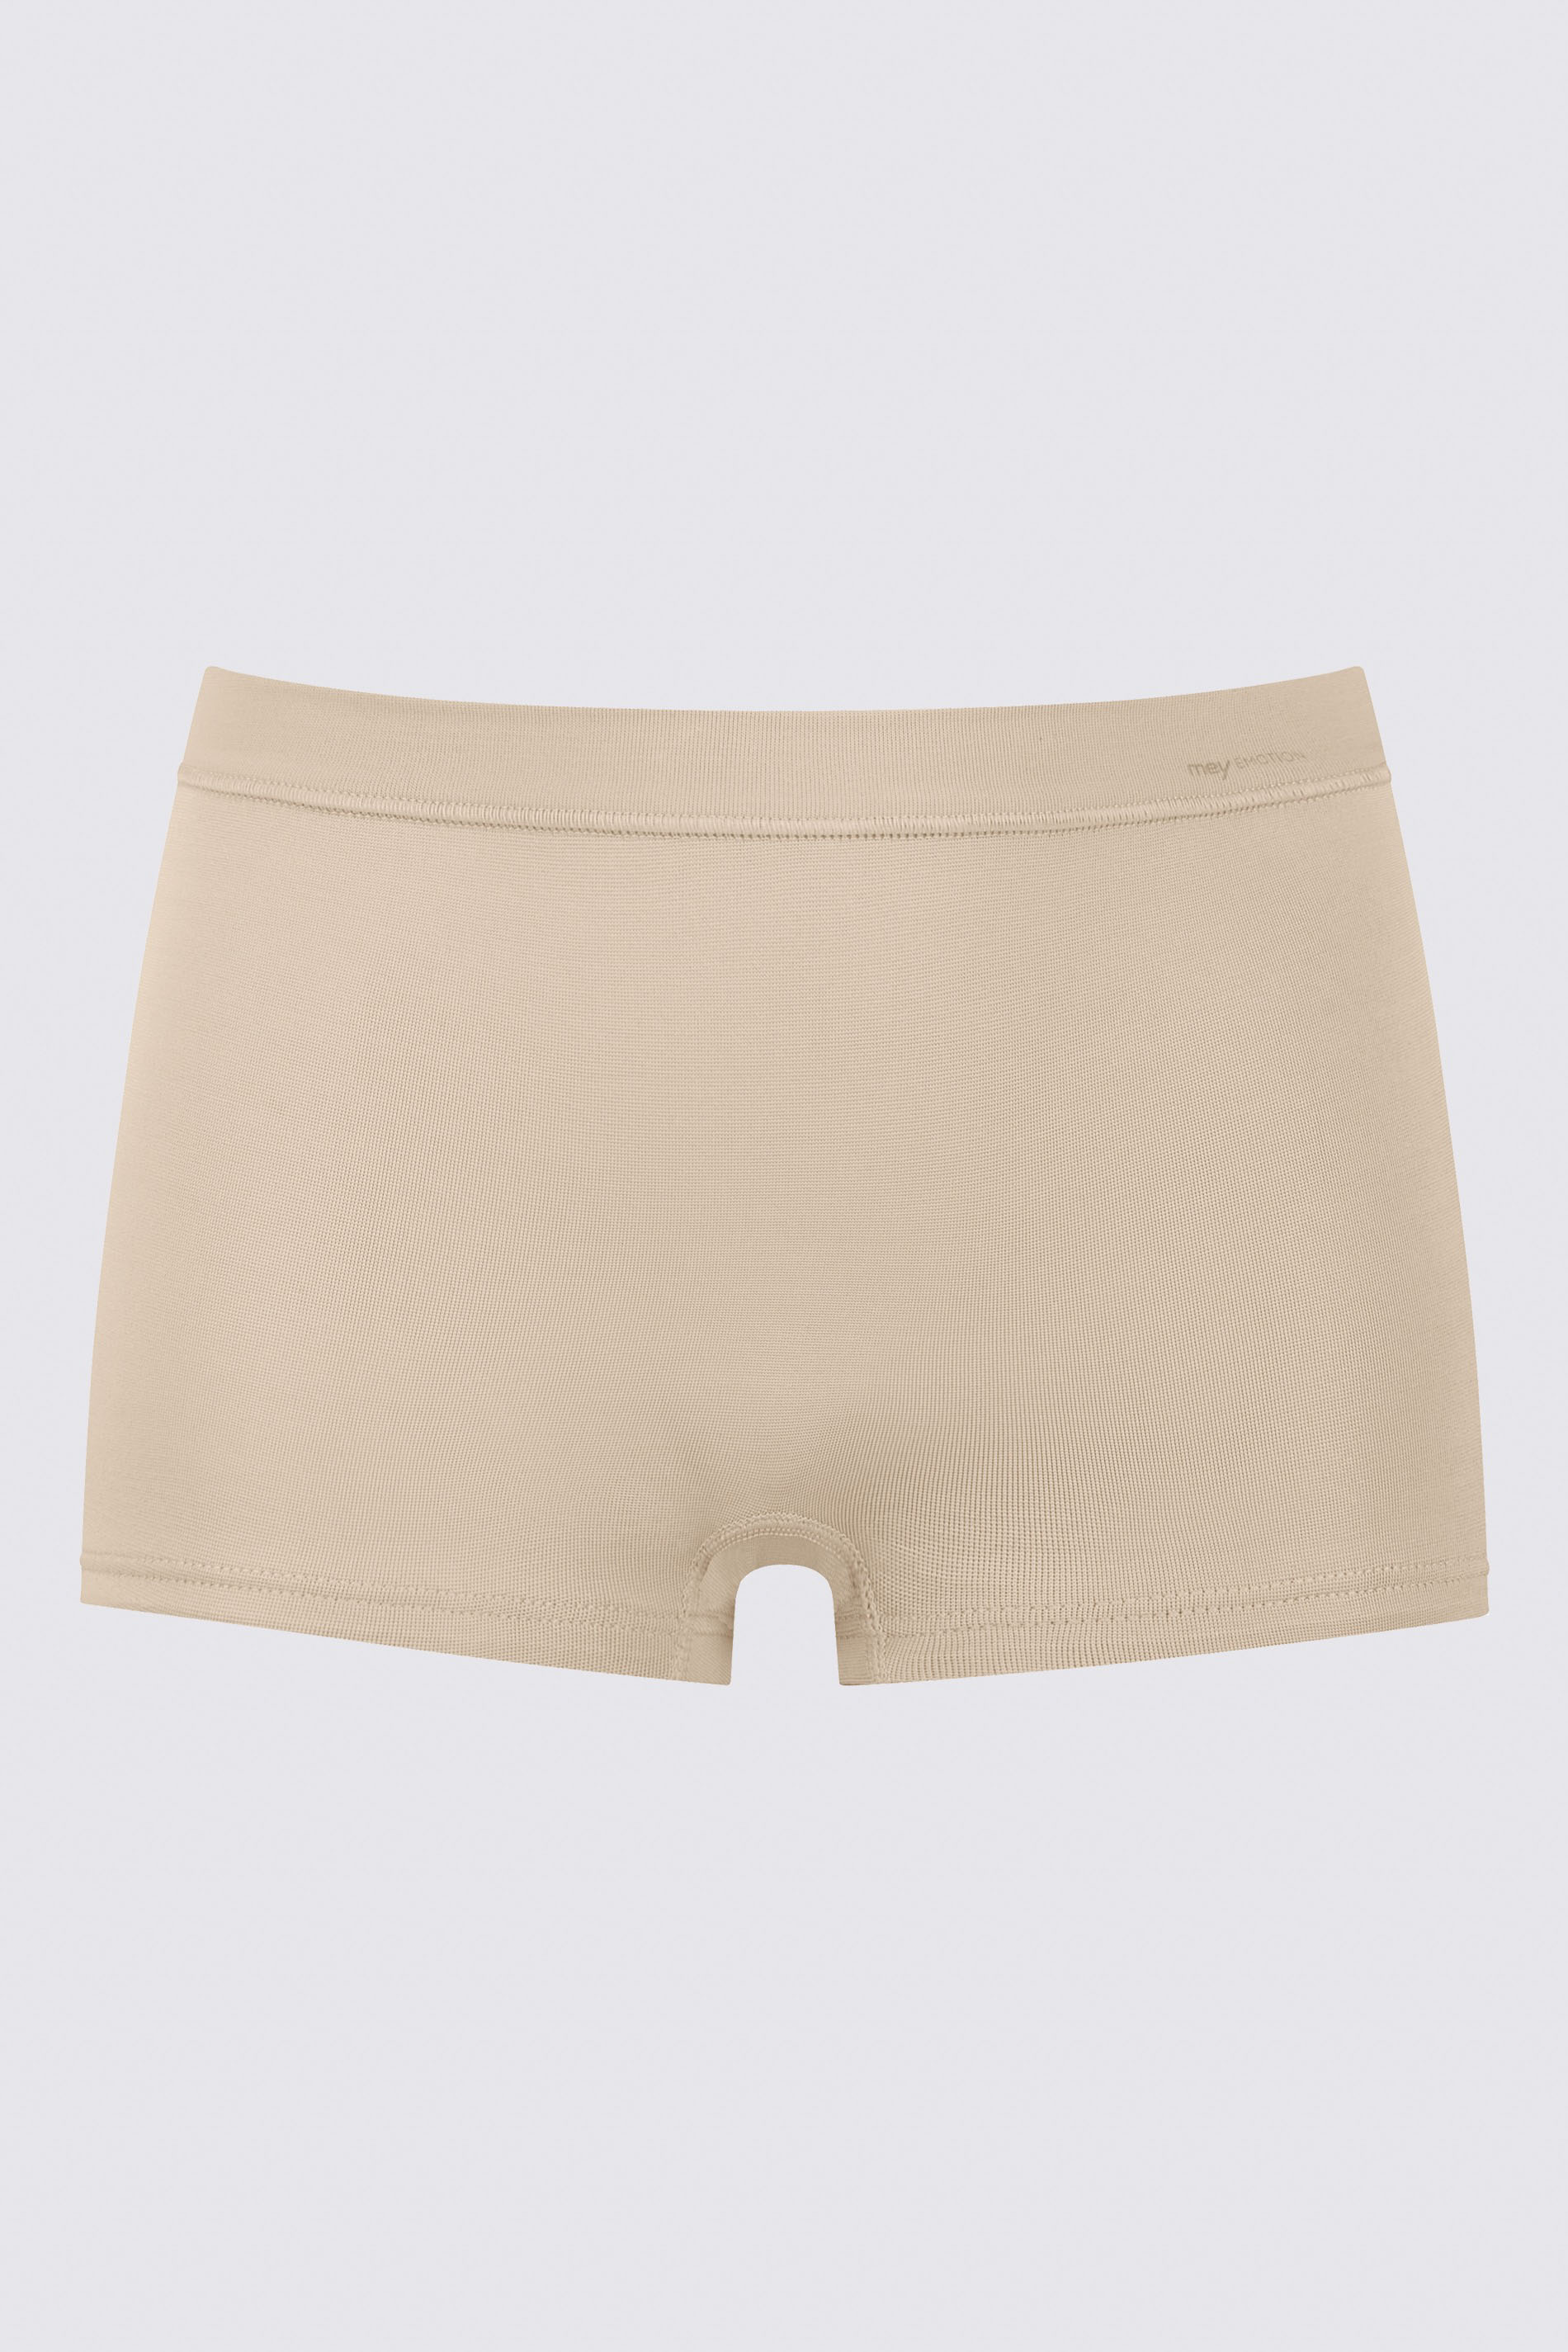 Panty Cream Tan Serie Emotion Uitknippen | mey®